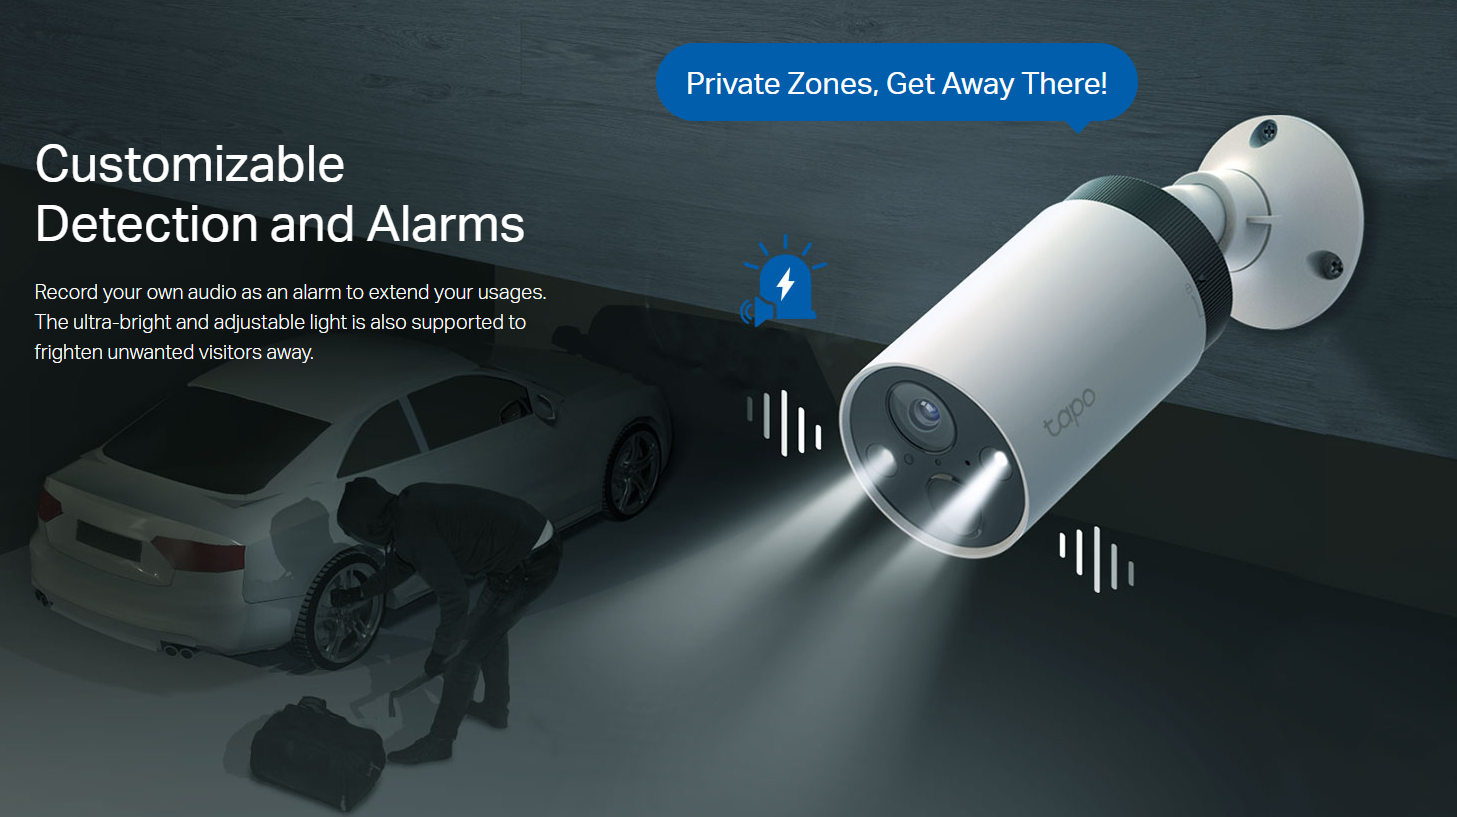 Customizable Detection and Alarms
Record your own audio as an alarm to extend your usages. The ultra-bright and adjustable light is also supported to frighten unwanted visitors away.